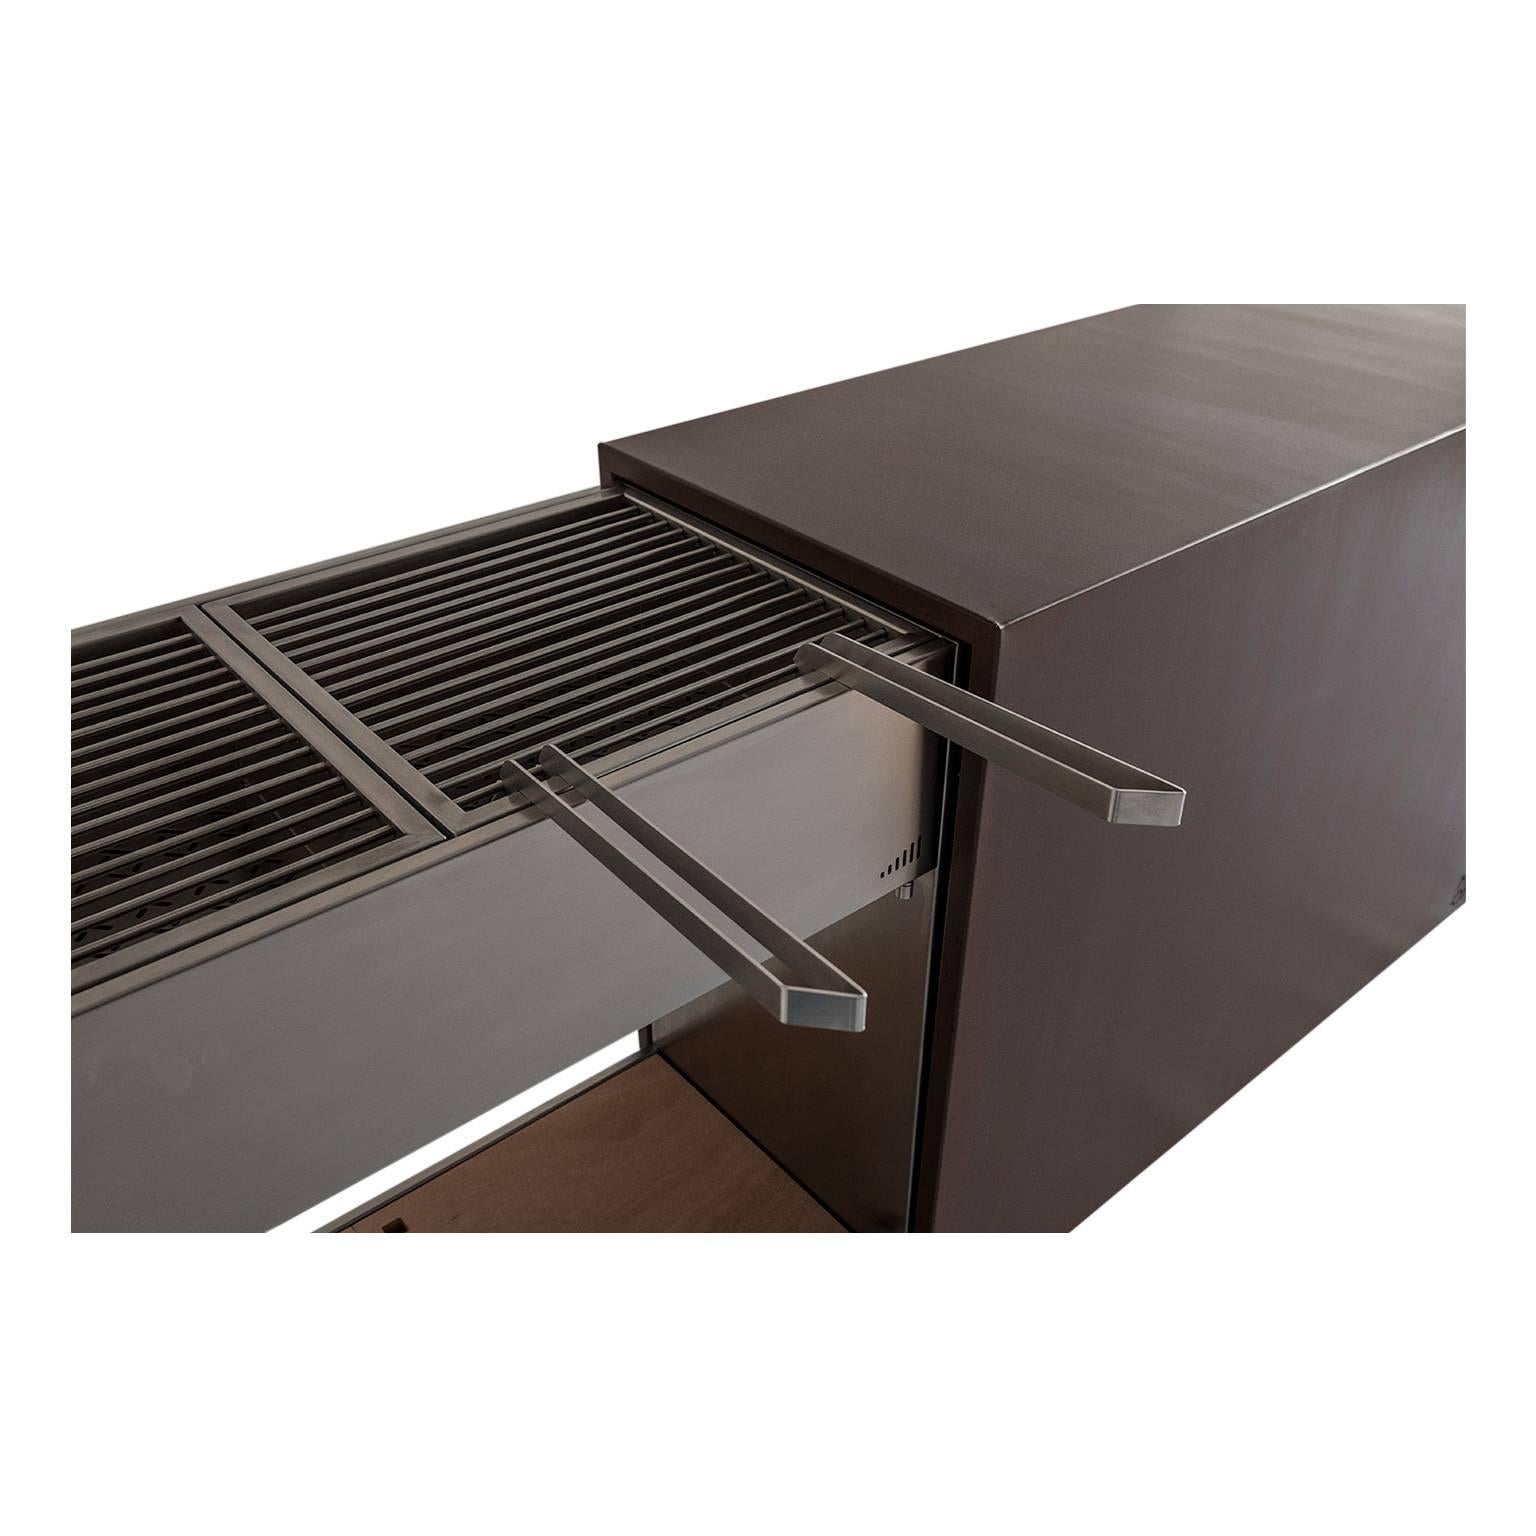 Brushed Elegant Corten Outdoor Charcoal Barbecue with Shelves and Cupboards, Snail For Sale